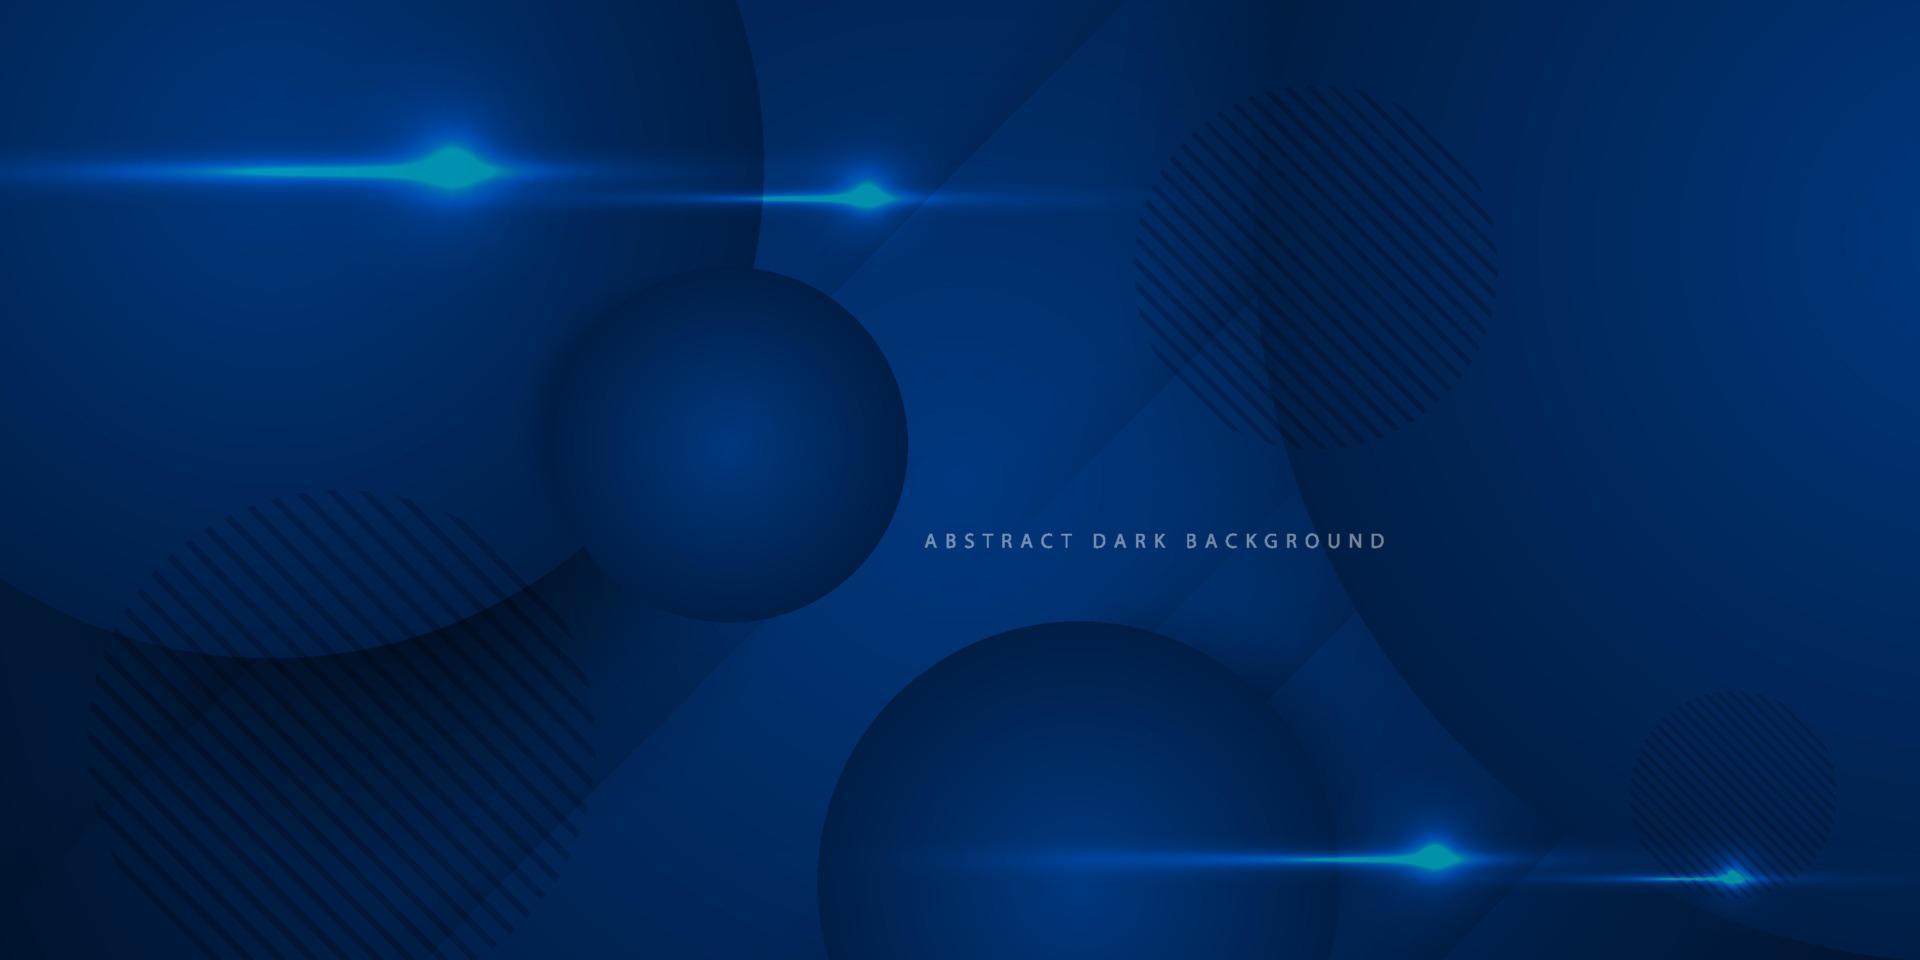 Geometry abstract background with dark blue circle space background design. Modern and cool design. Vector Eps10